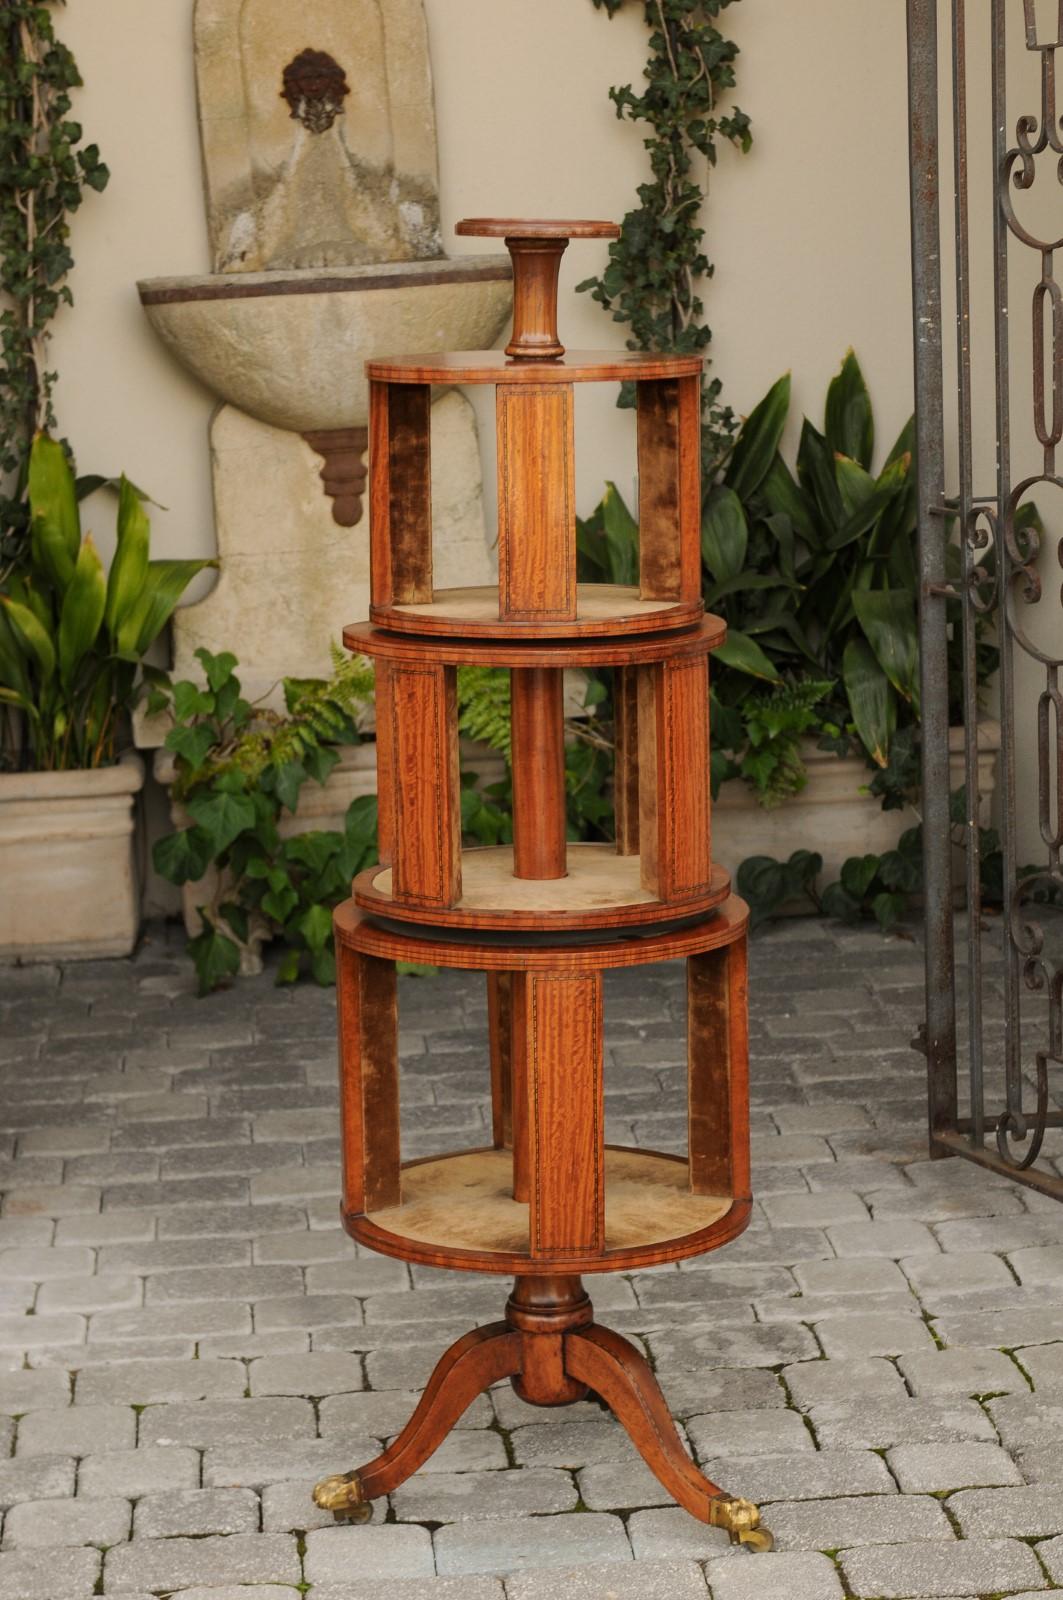 An English Georgian period mahogany tiered book revolving trolley on casters from the early 19th century, with suede lining, banding and tripod base. Born during the first quarter of the 19th century, this English circular book trolley features a